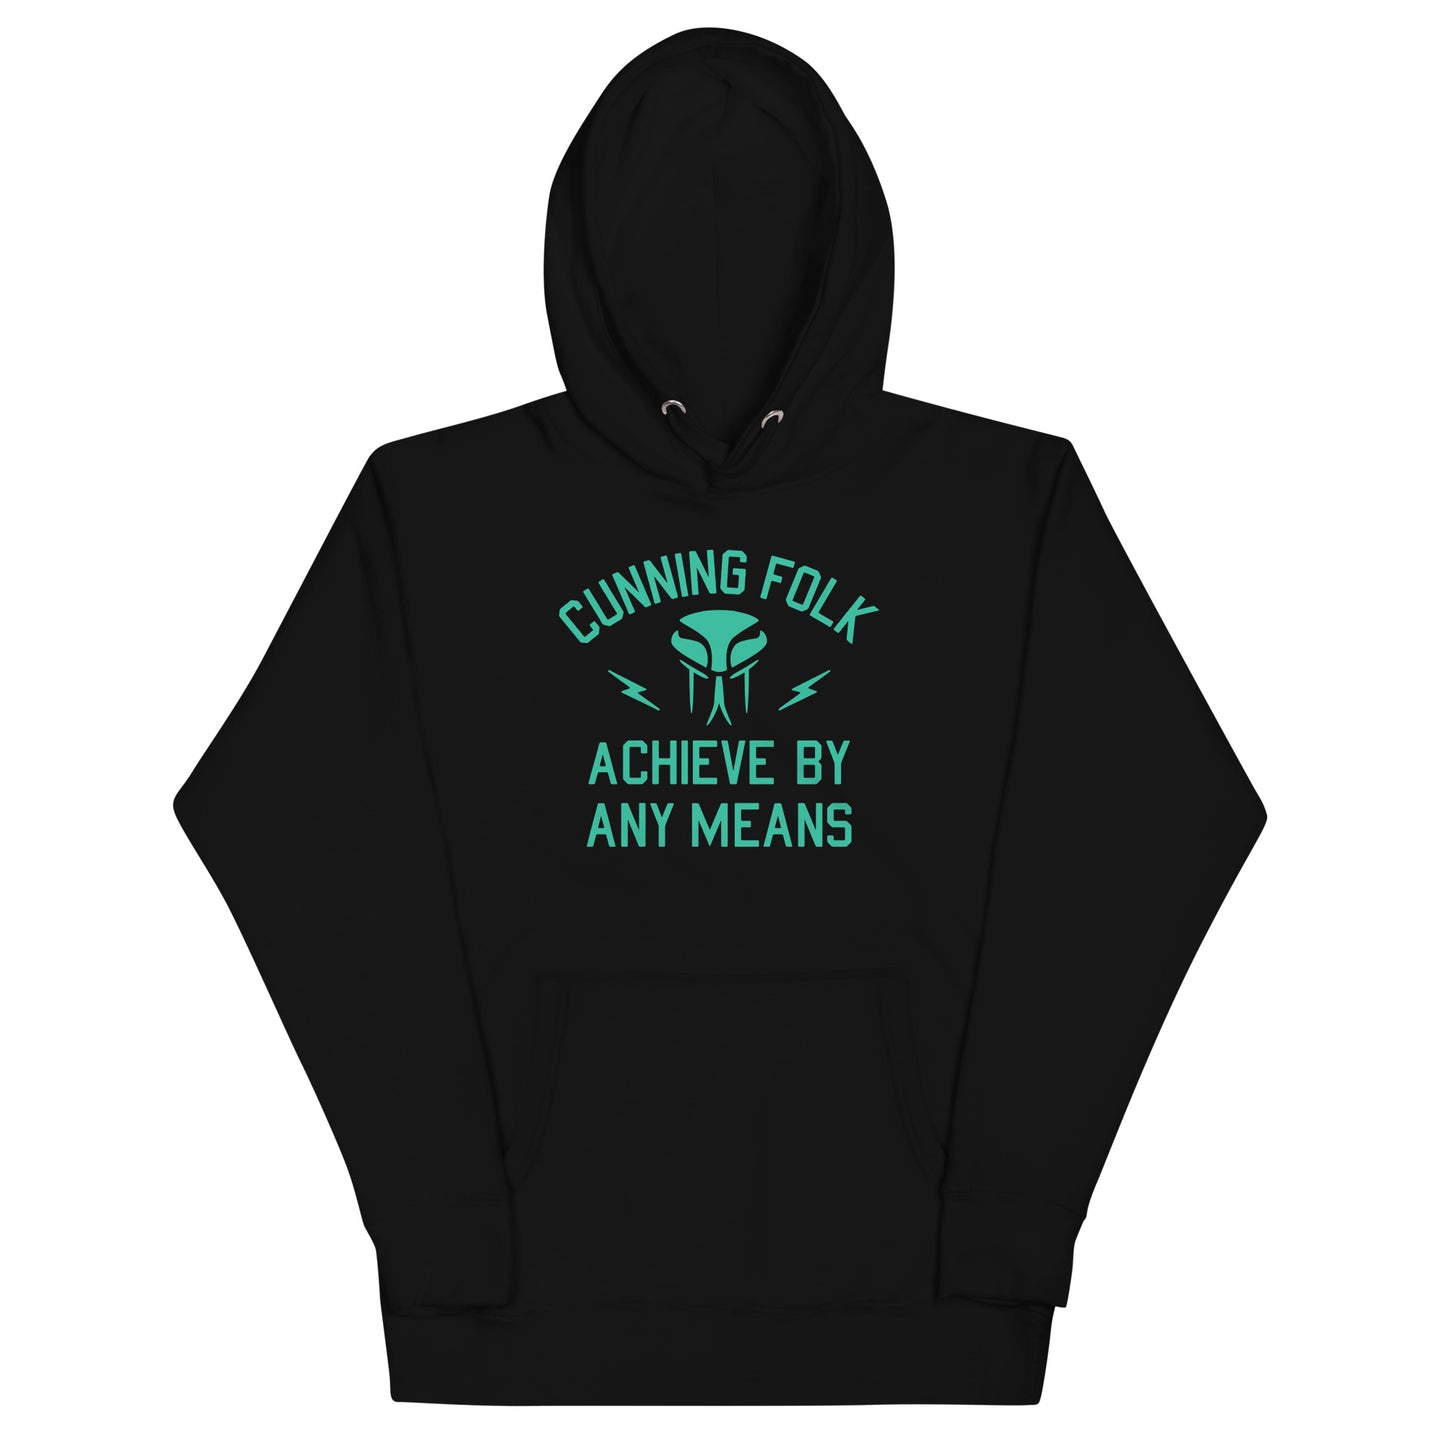 Cunning Folk Achieve By Any Means Unisex Hoodie